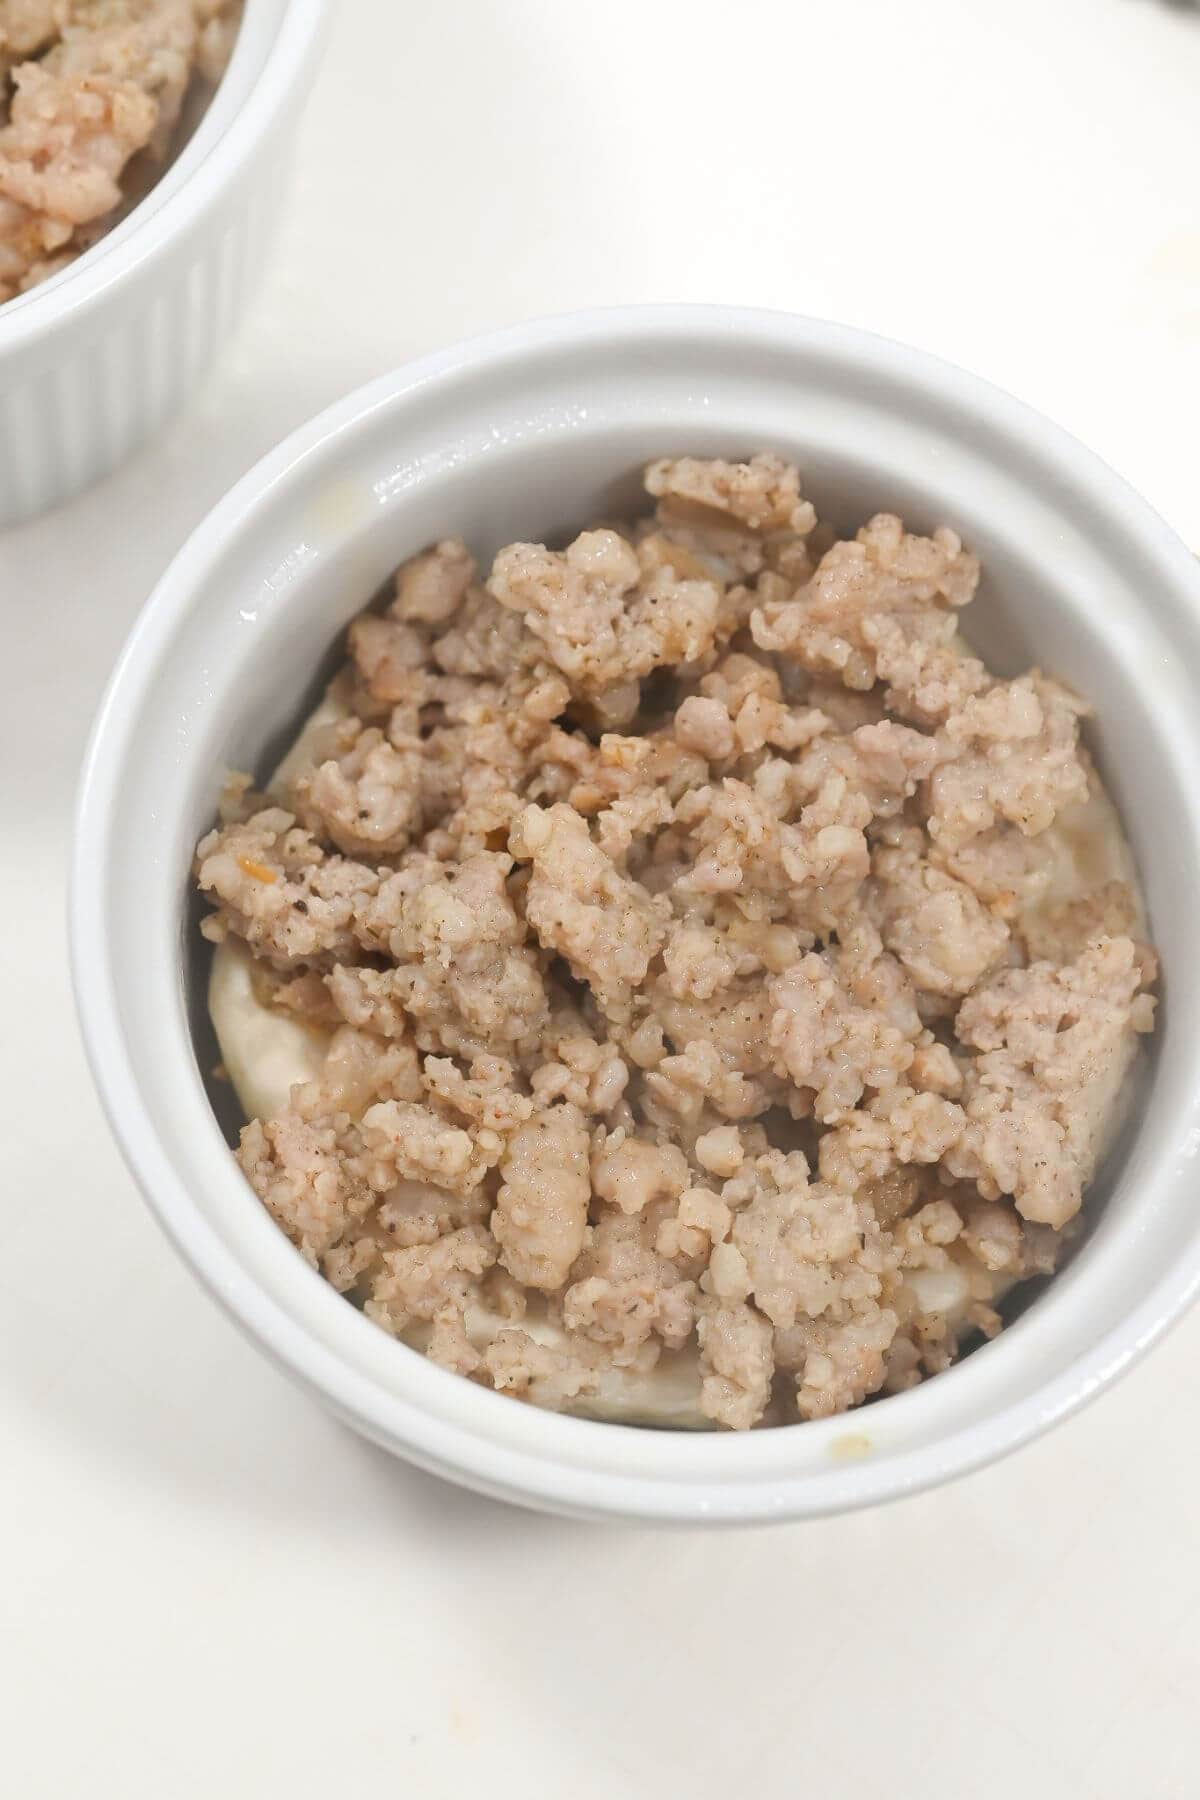 A ramekin with biscuit dough and cooked ground sausage.